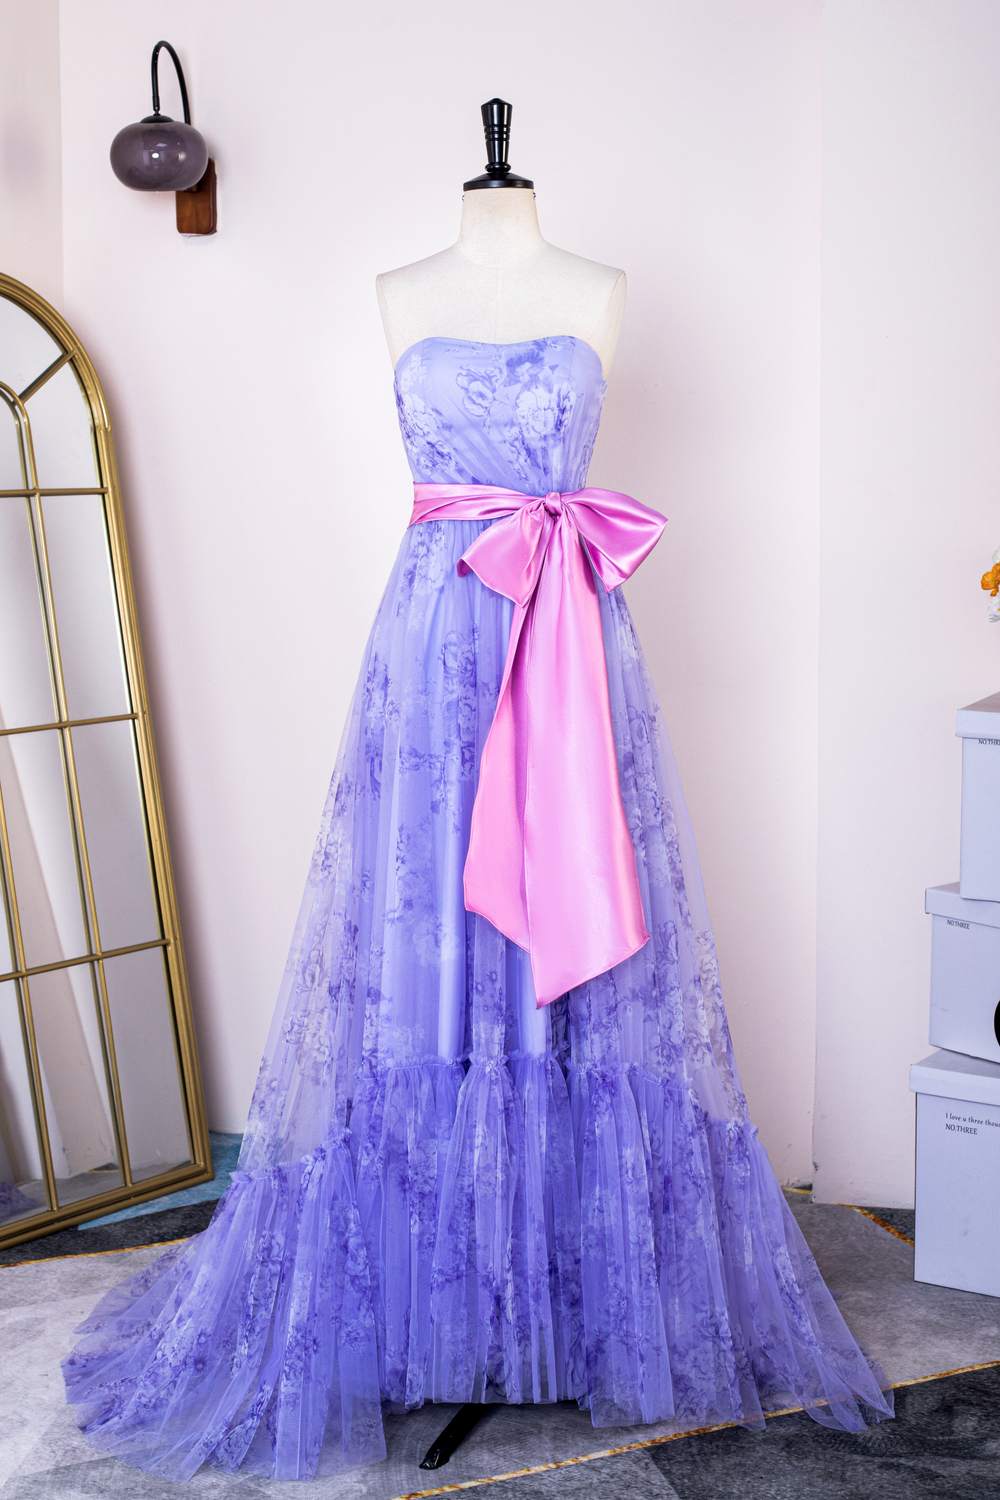 Lavender Floral Strapless Ruffled Long Prom Dress with Bow Sash